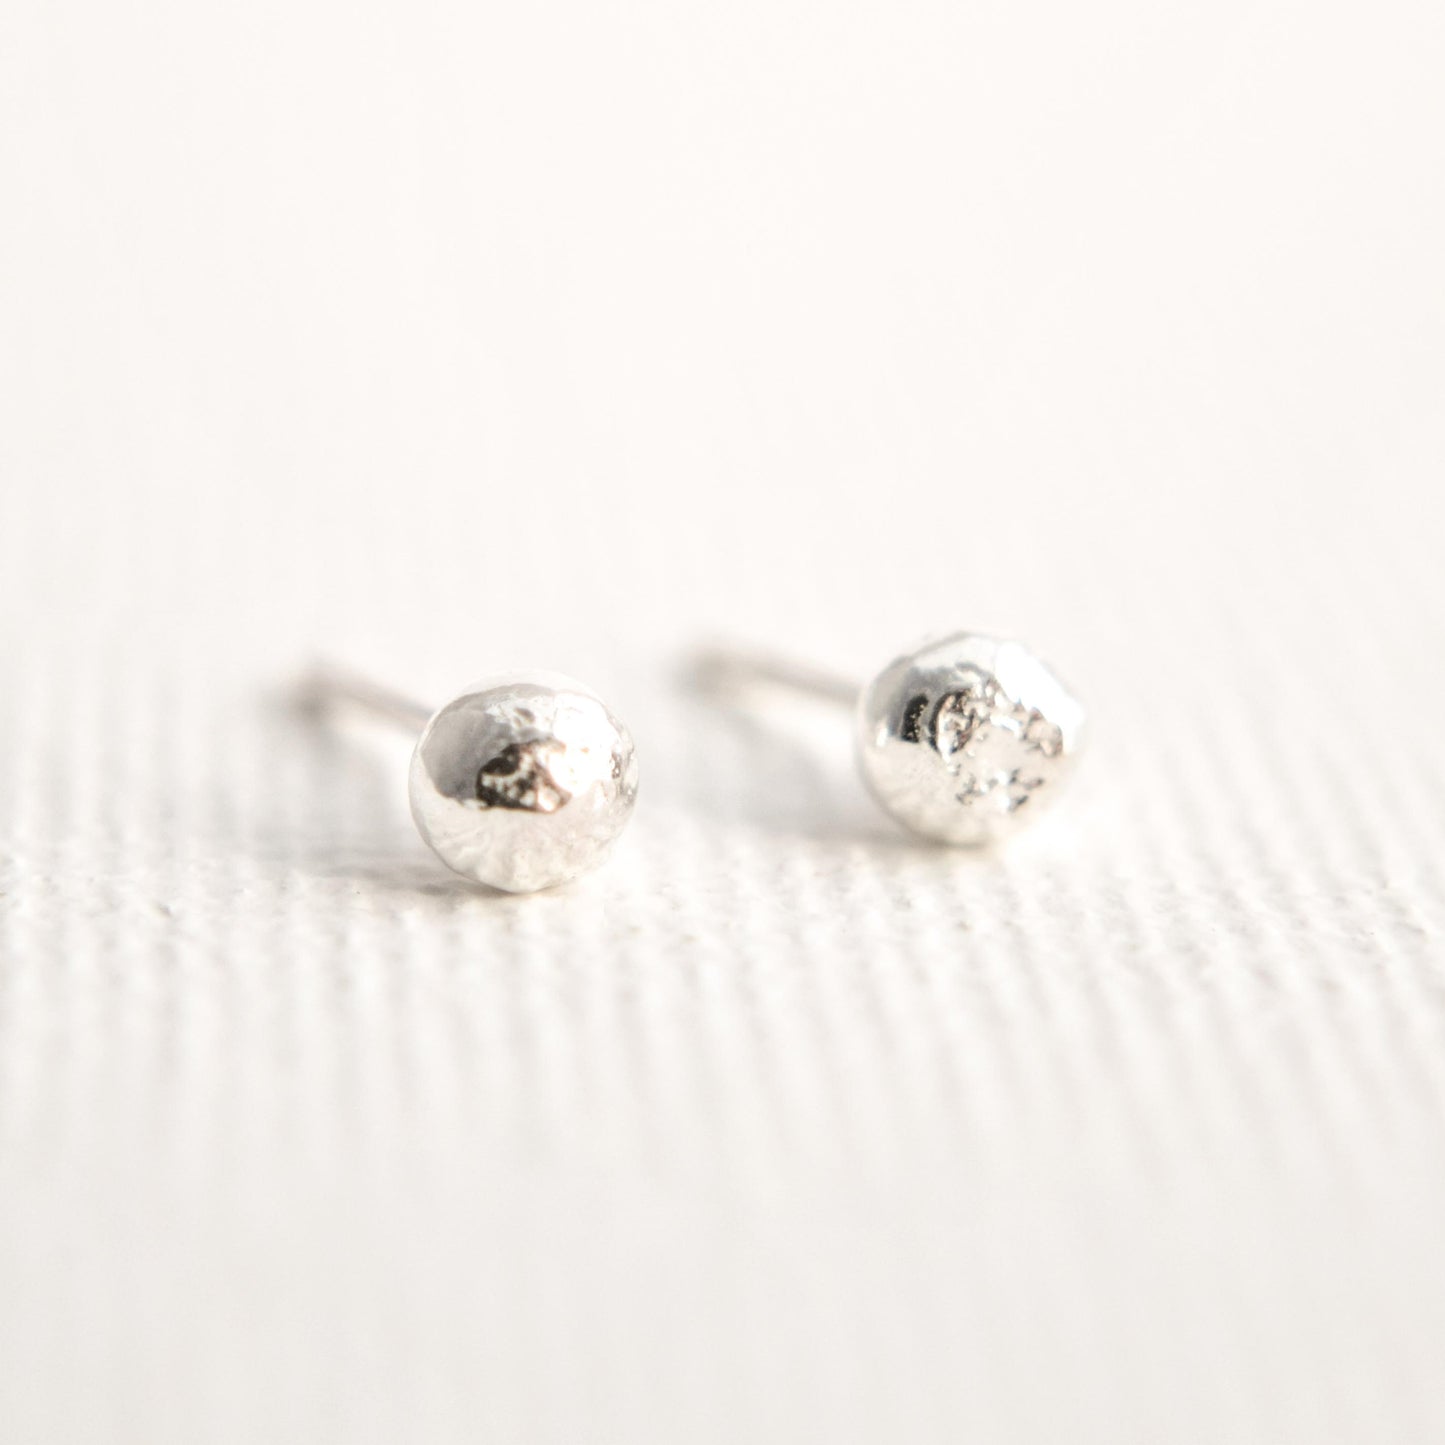 silver ball studs on white background image shows texture of silver